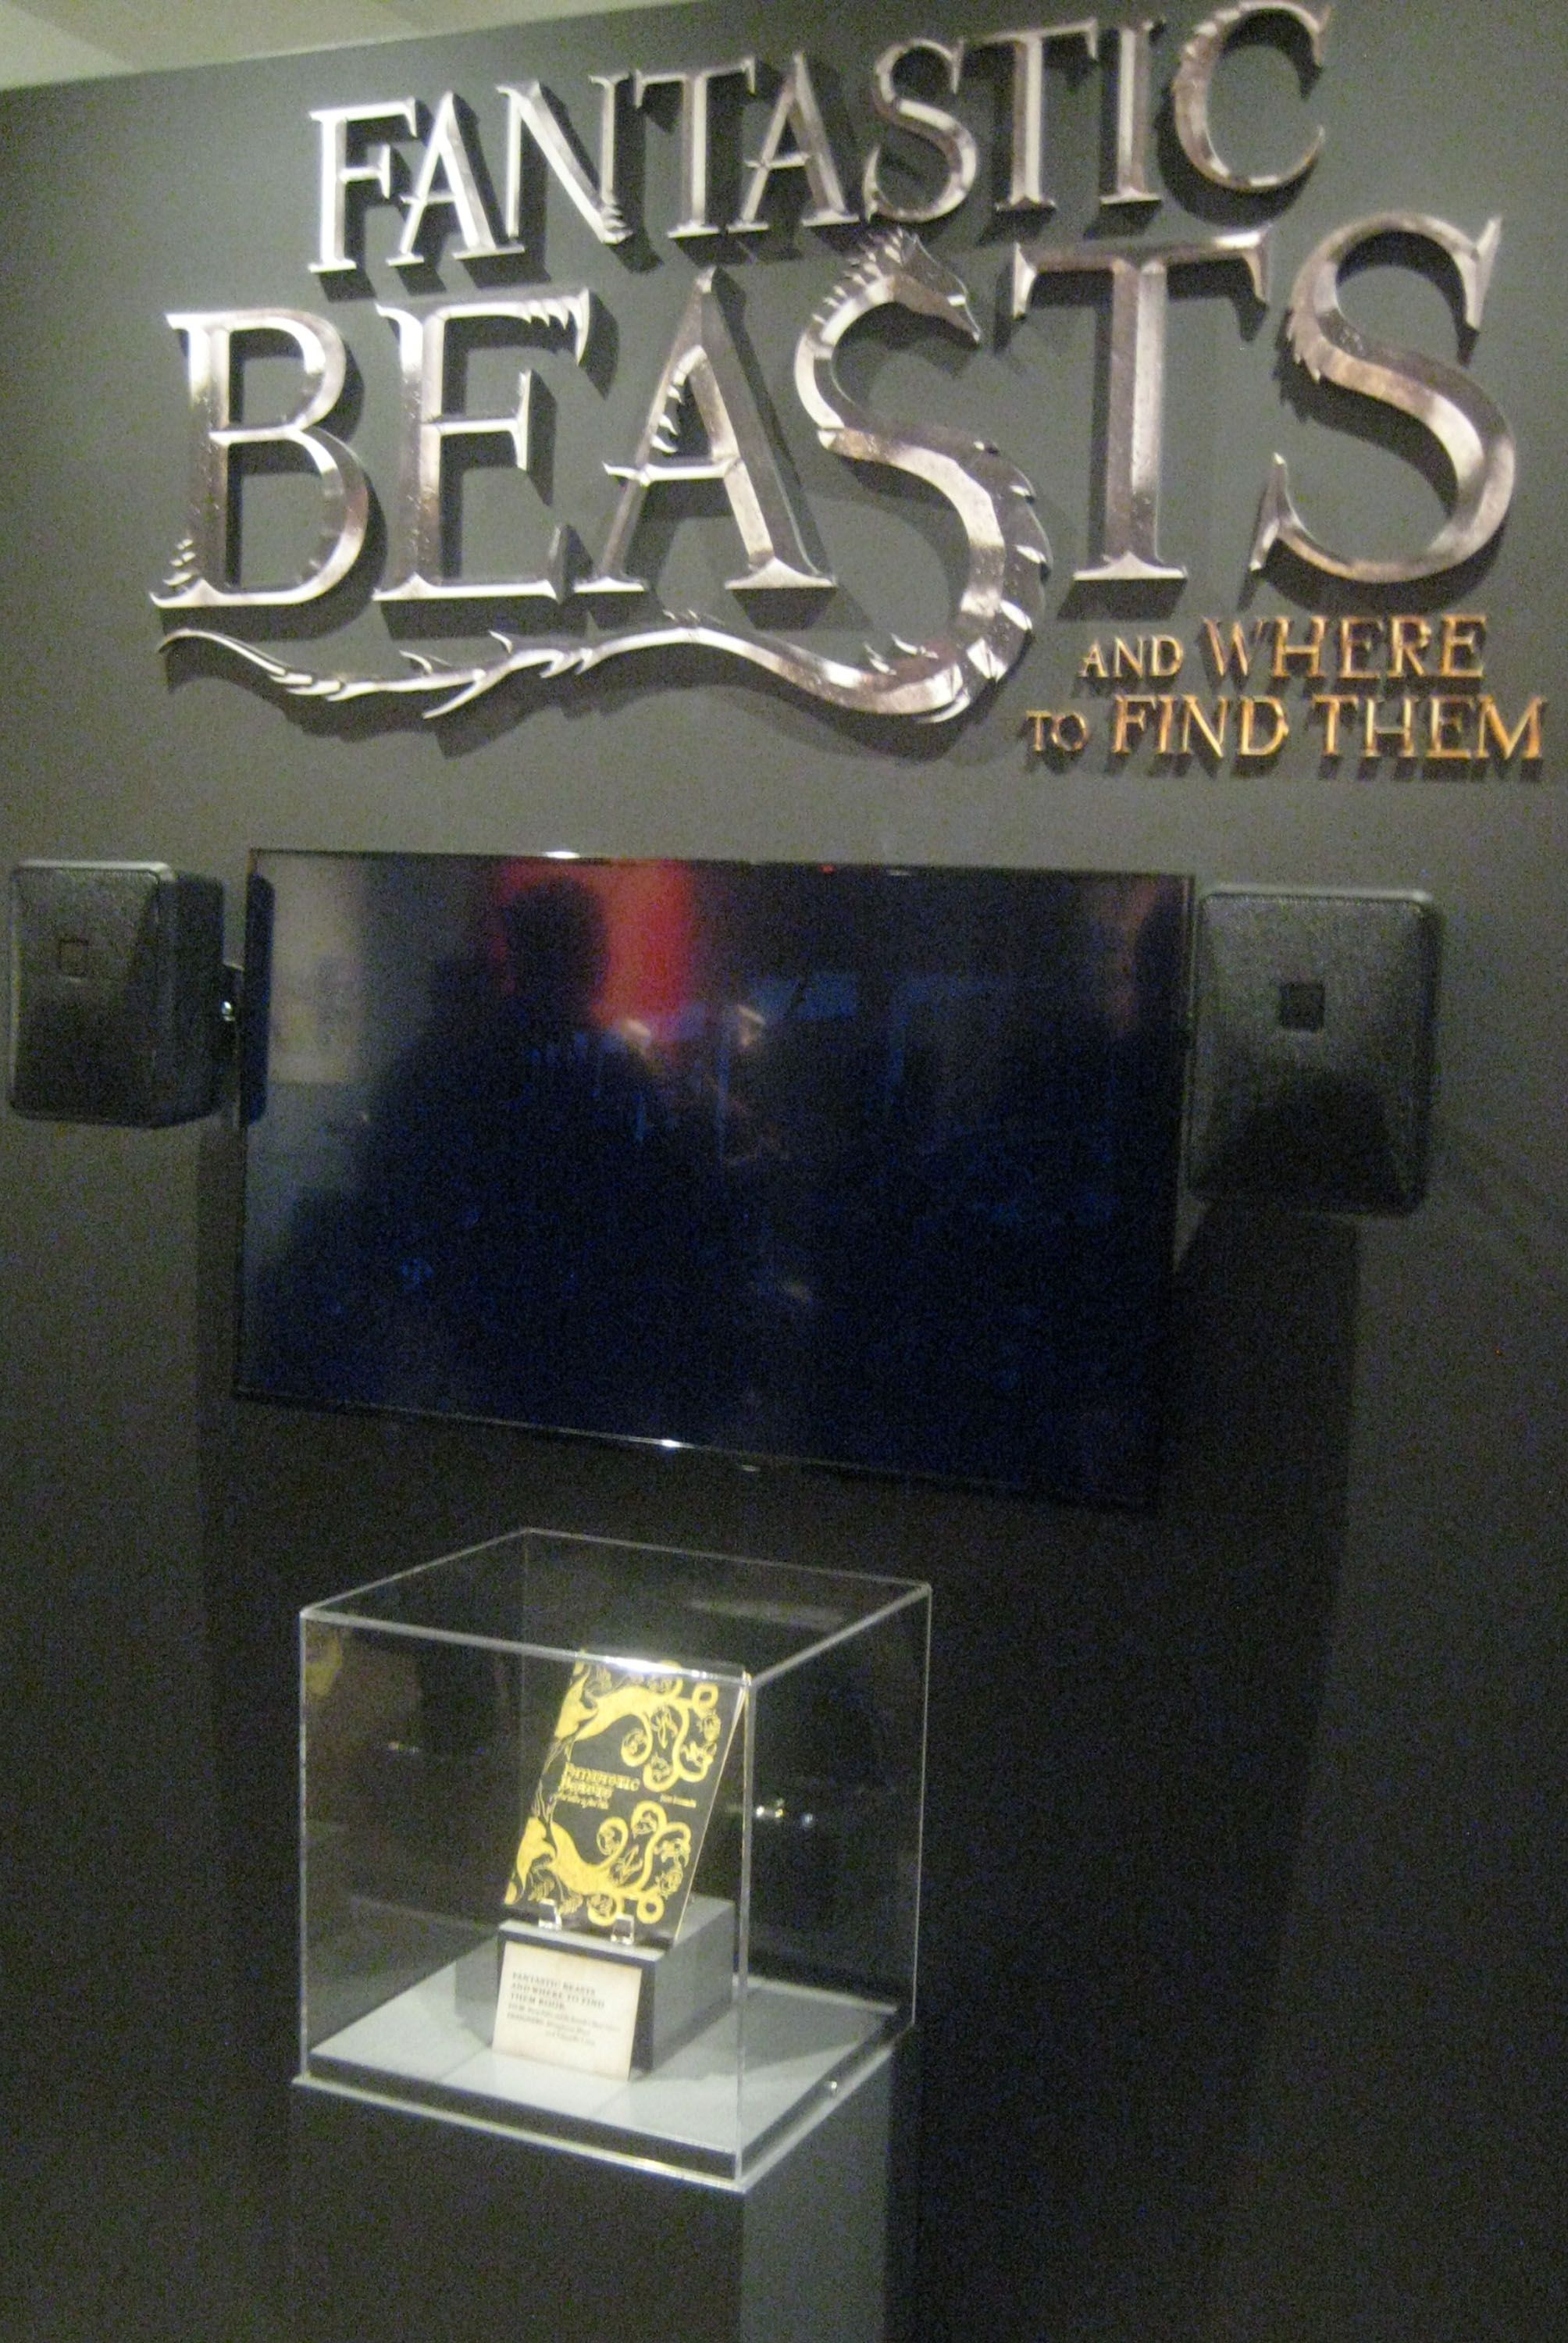 Over 100 Fantastic Beasts and Harry Potter Exhibit Images | Collider2008 x 3000